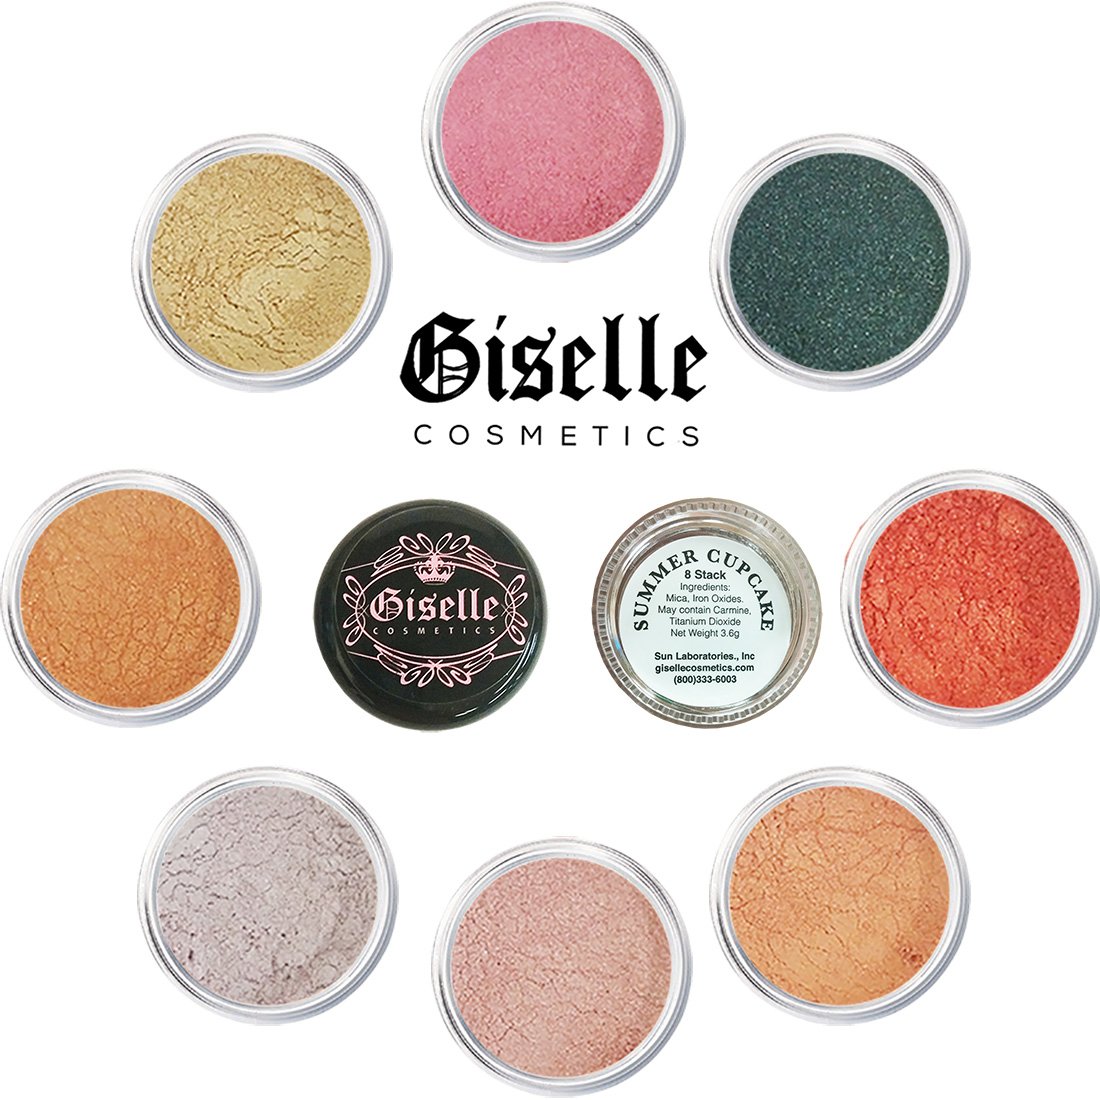  Giselle Cosmetics EyeShadow Palette - Mineral Makeup Eyeshadow Powder and Contouring Palette | Pure, Non-Diluted Shimmer Mineral Make Up in 8 Coco Hues and Shades